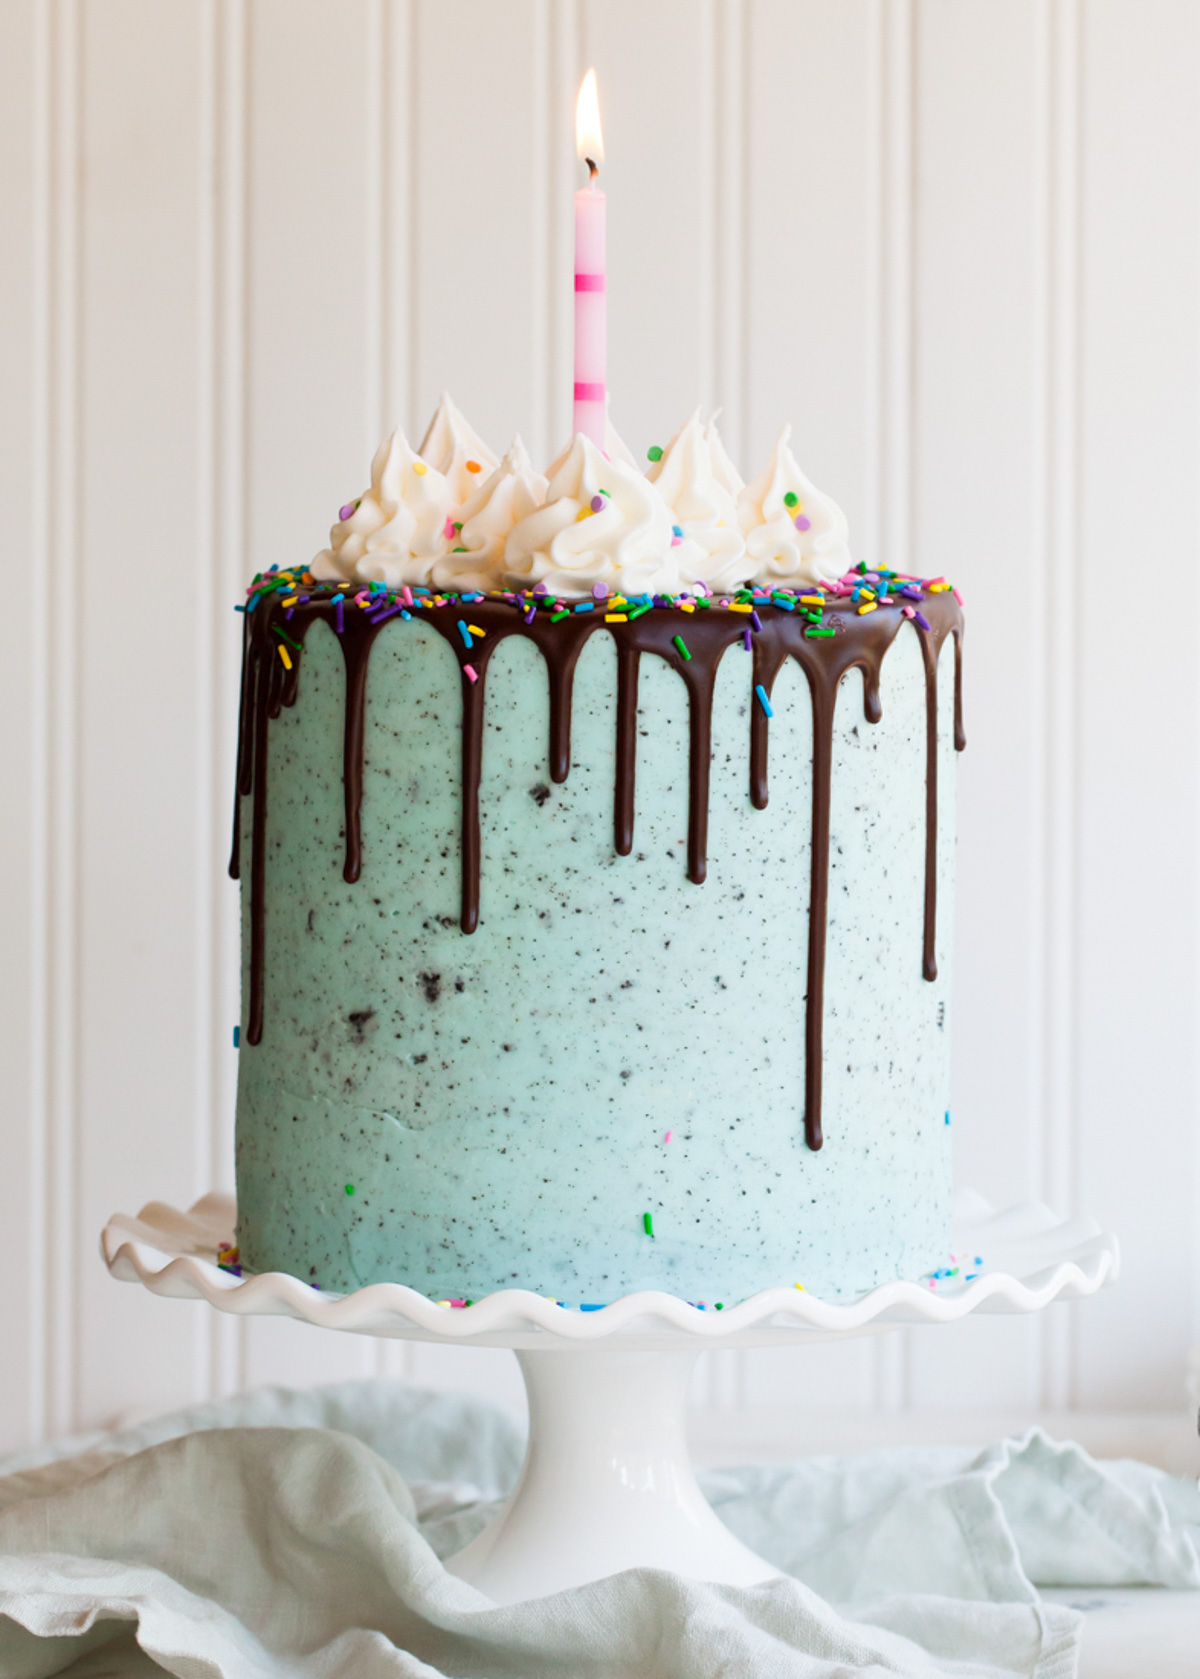 A side view of an Oreo layer cake with chocolate drips and piped buttercream frosting